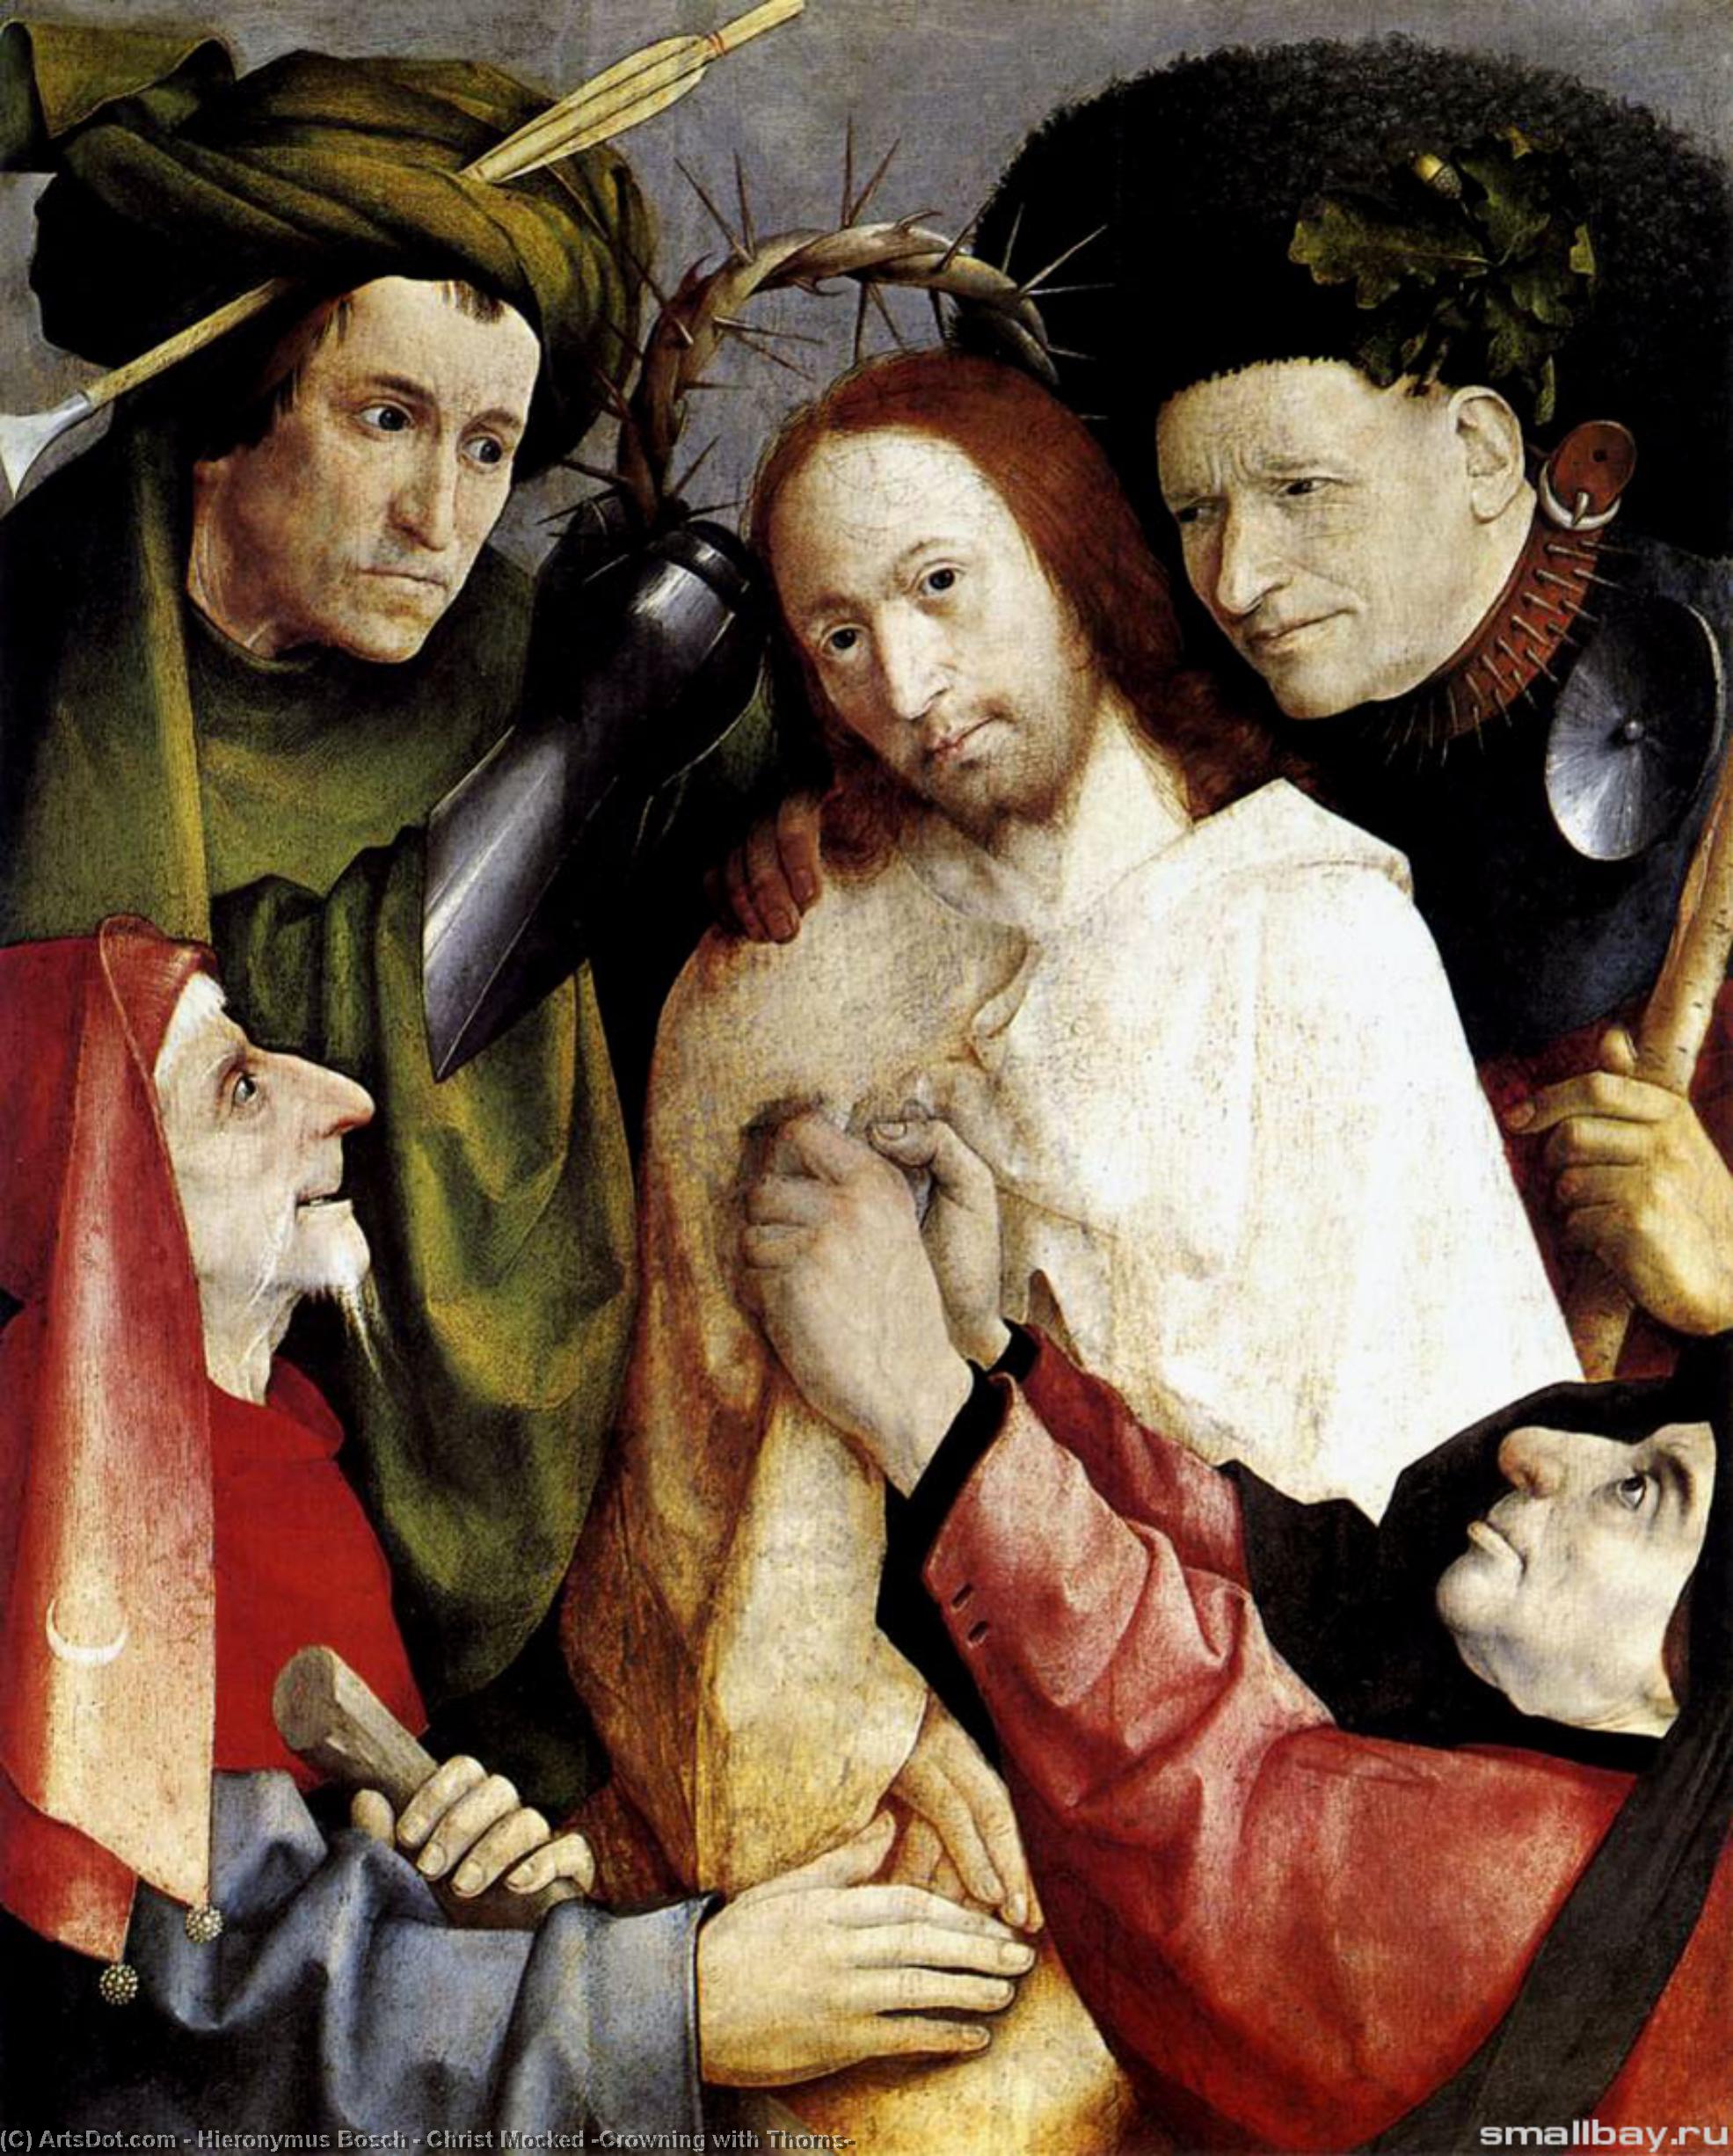 WikiOO.org - 백과 사전 - 회화, 삽화 Hieronymus Bosch - Christ Mocked (Crowning with Thorns)